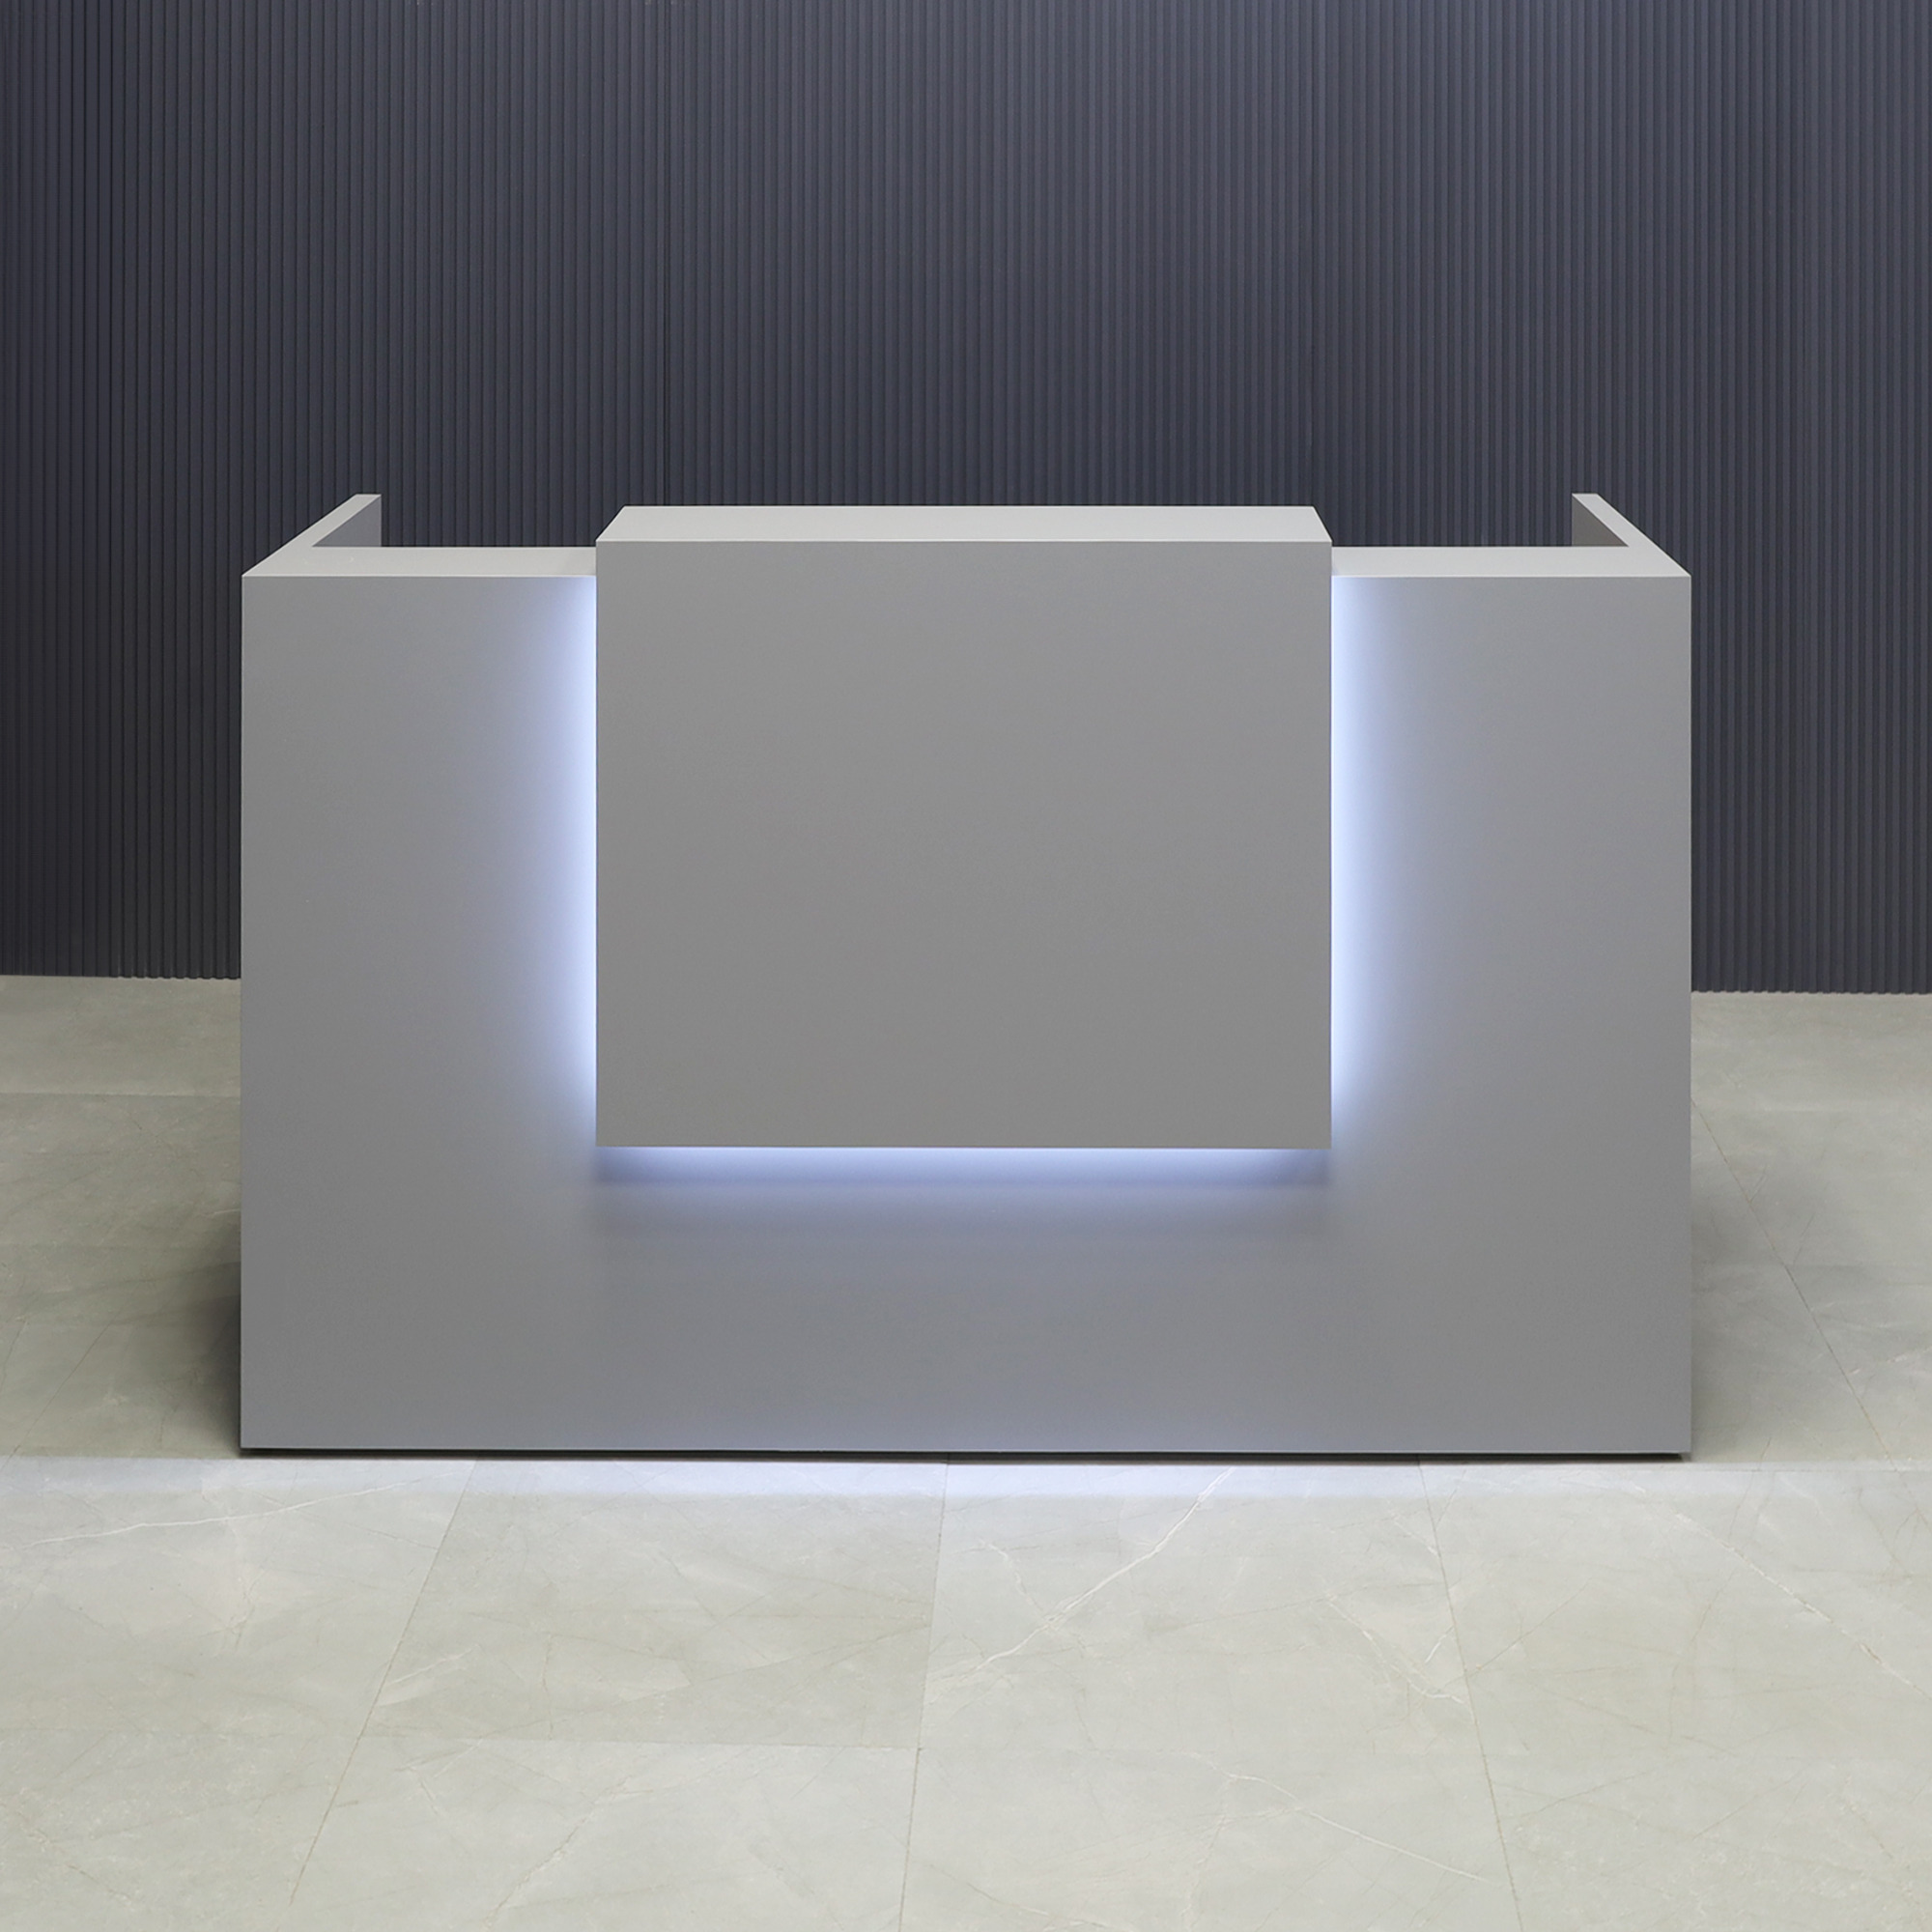 72-inch Chicago Custom Reception Desk in fog gray matte laminate counter and desk, with white LED, shown here.